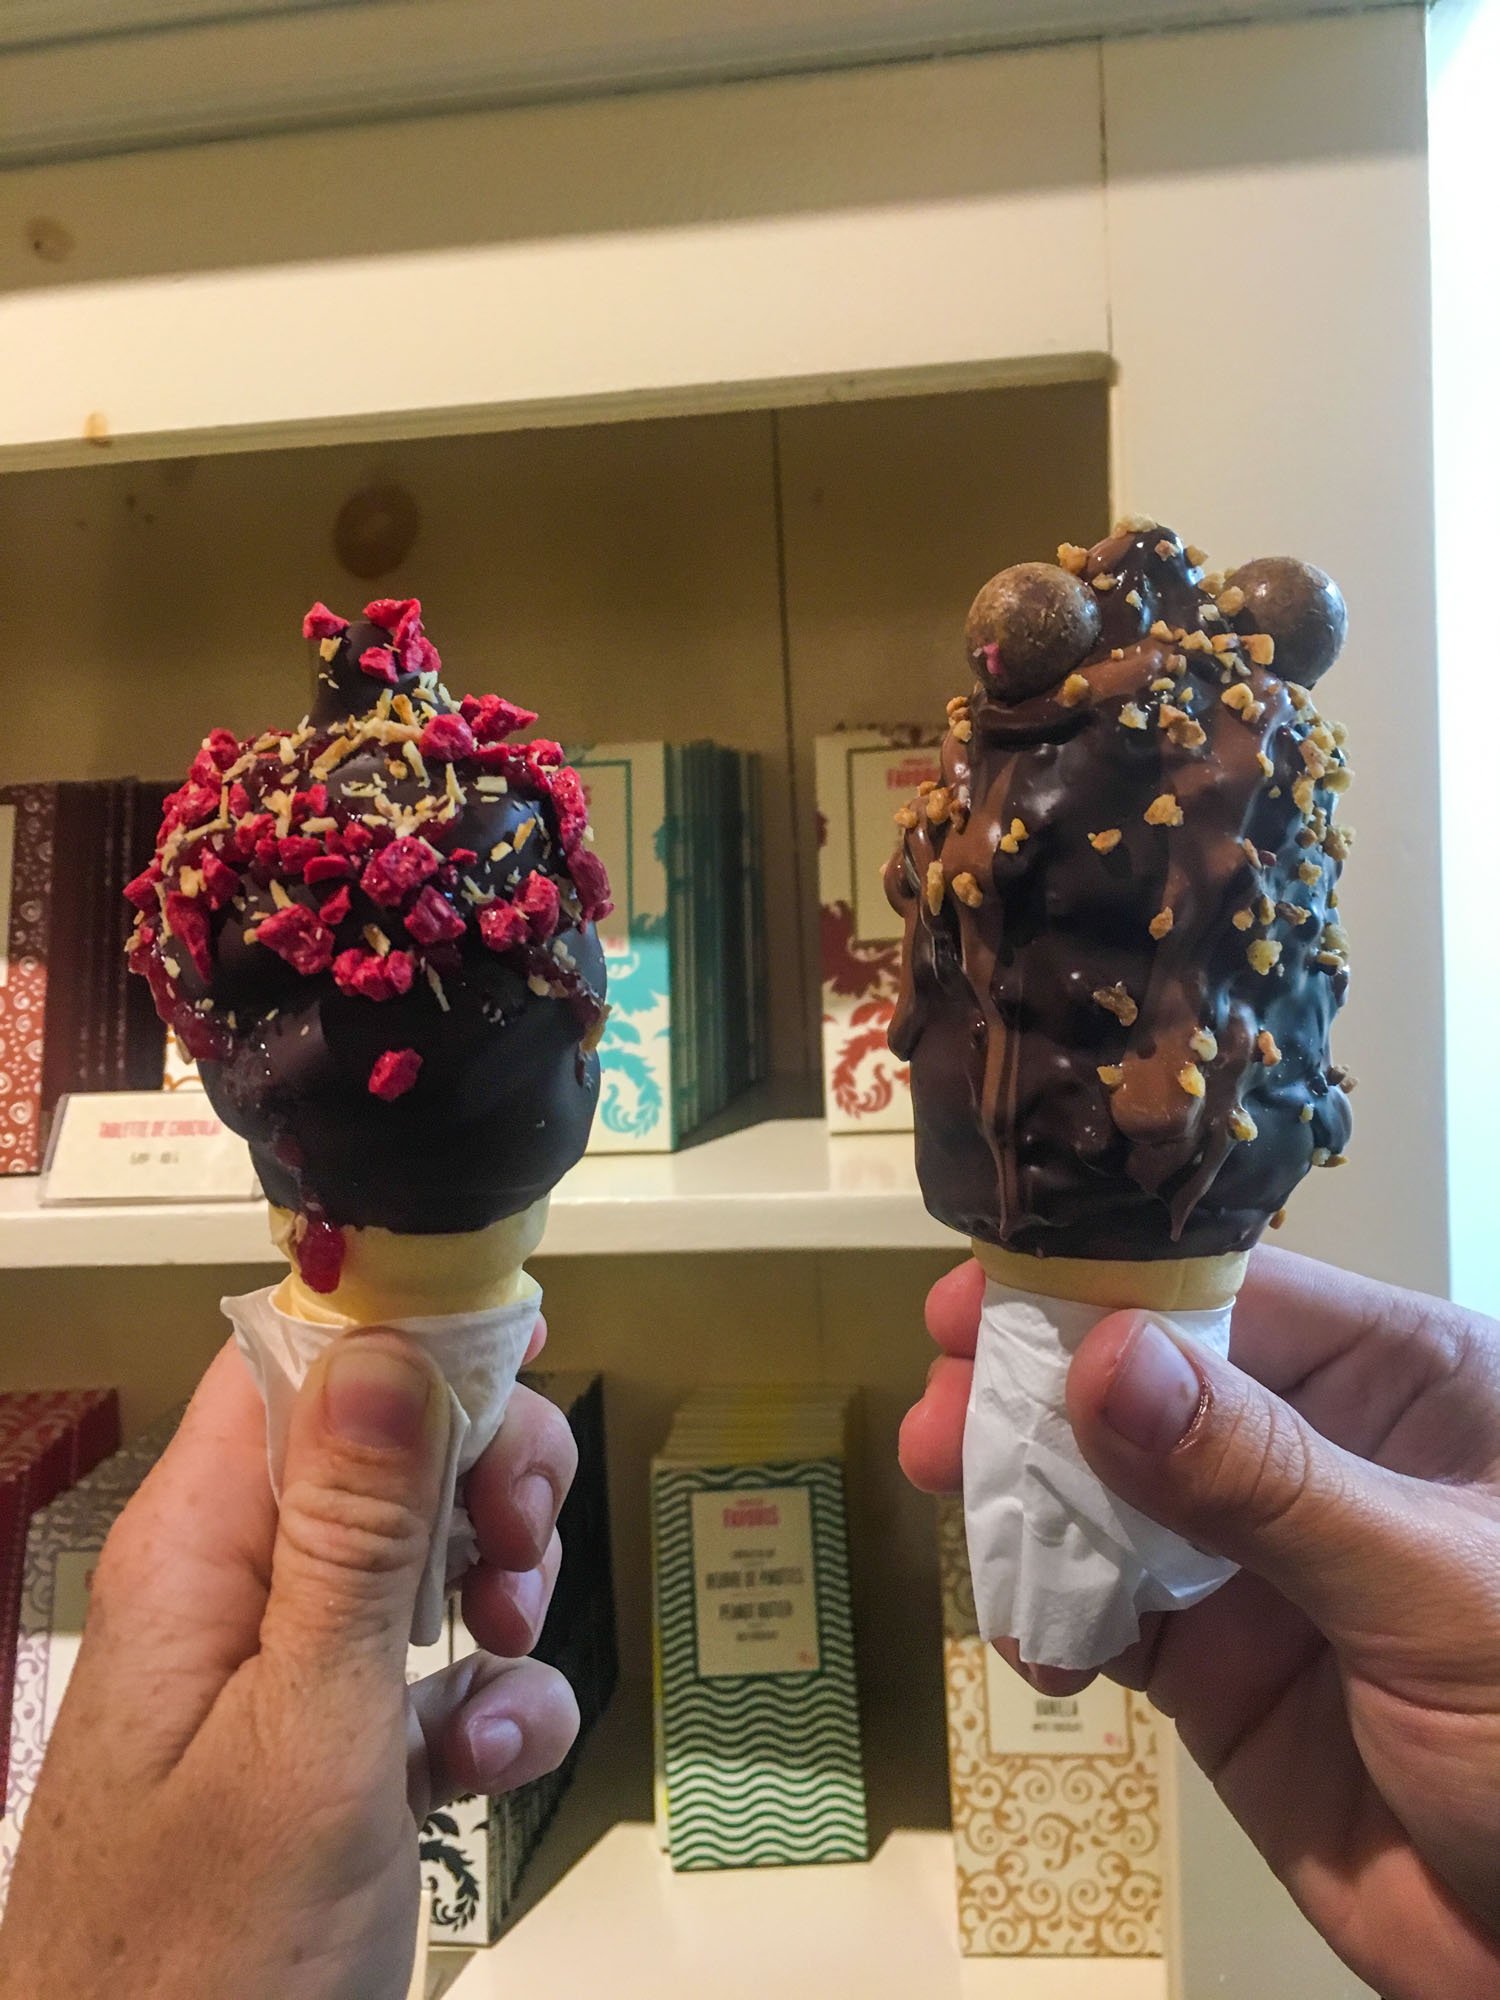  Our fancy dip cones from Chocolats Favoris 